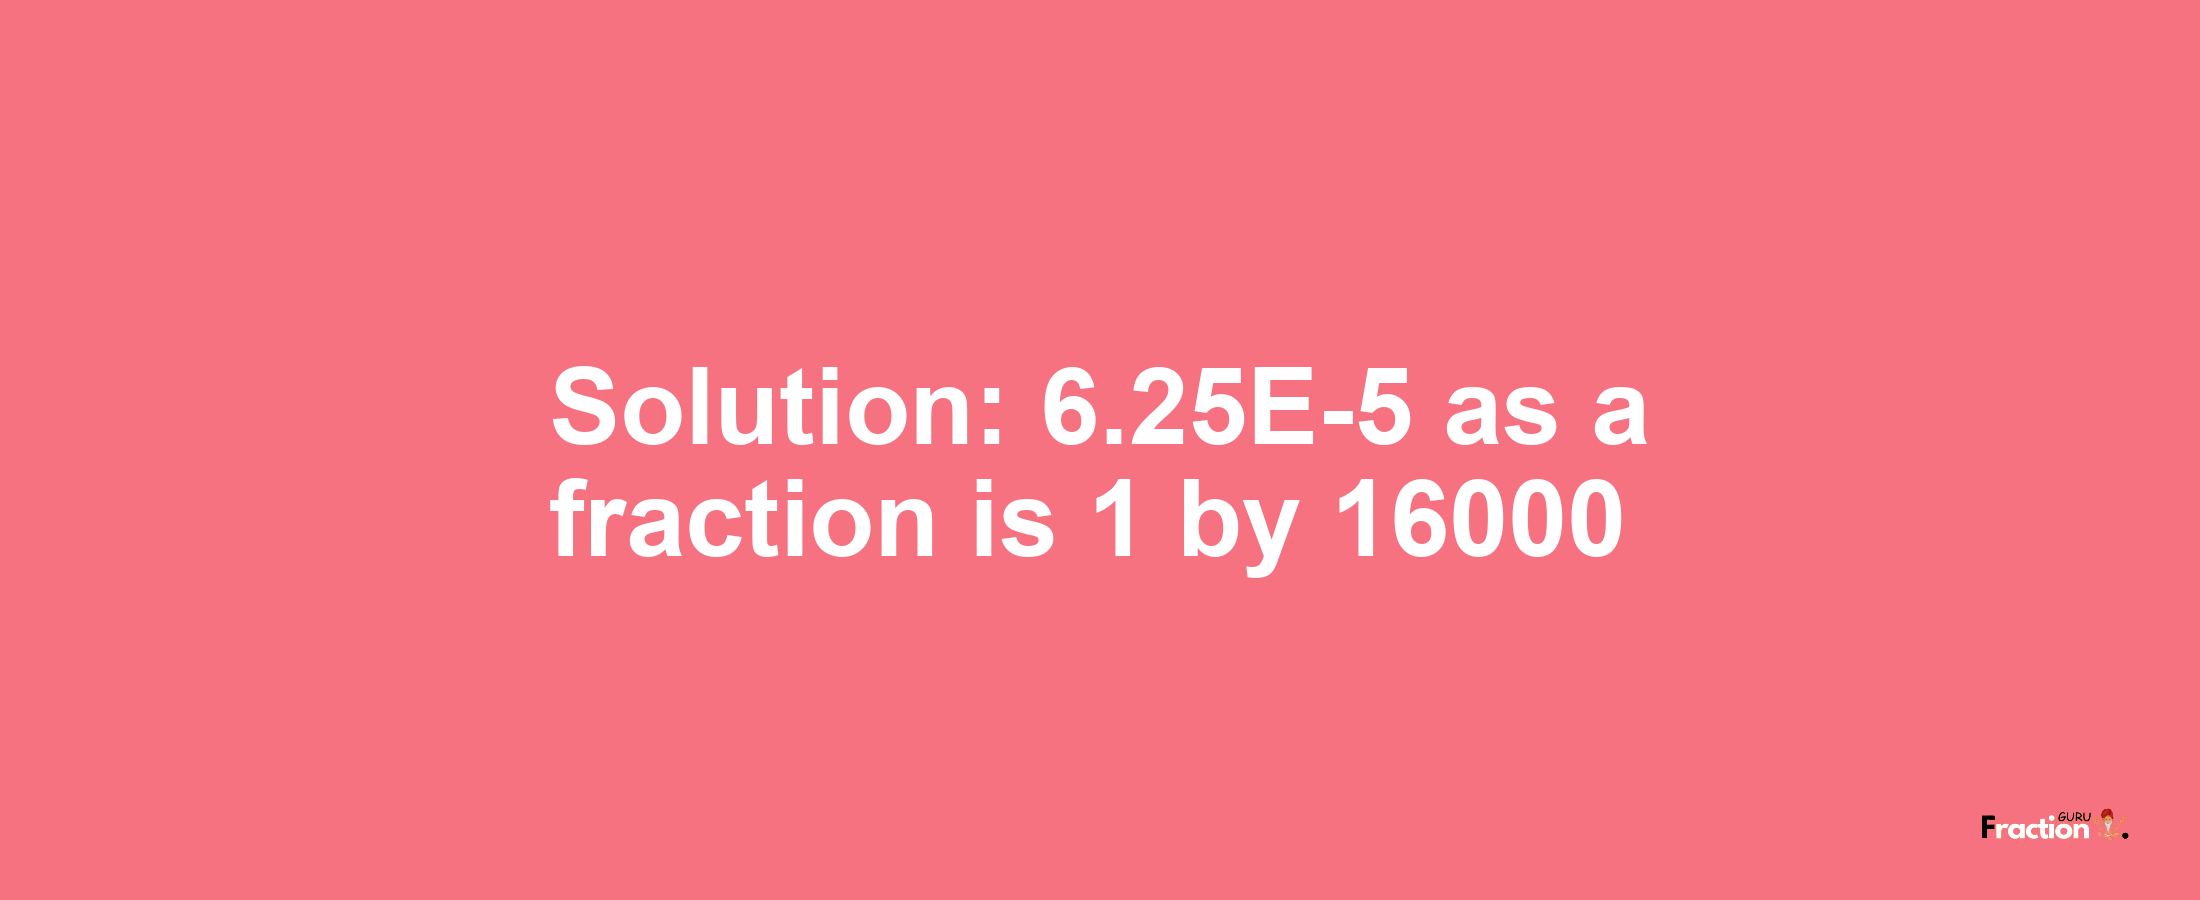 Solution:6.25E-5 as a fraction is 1/16000